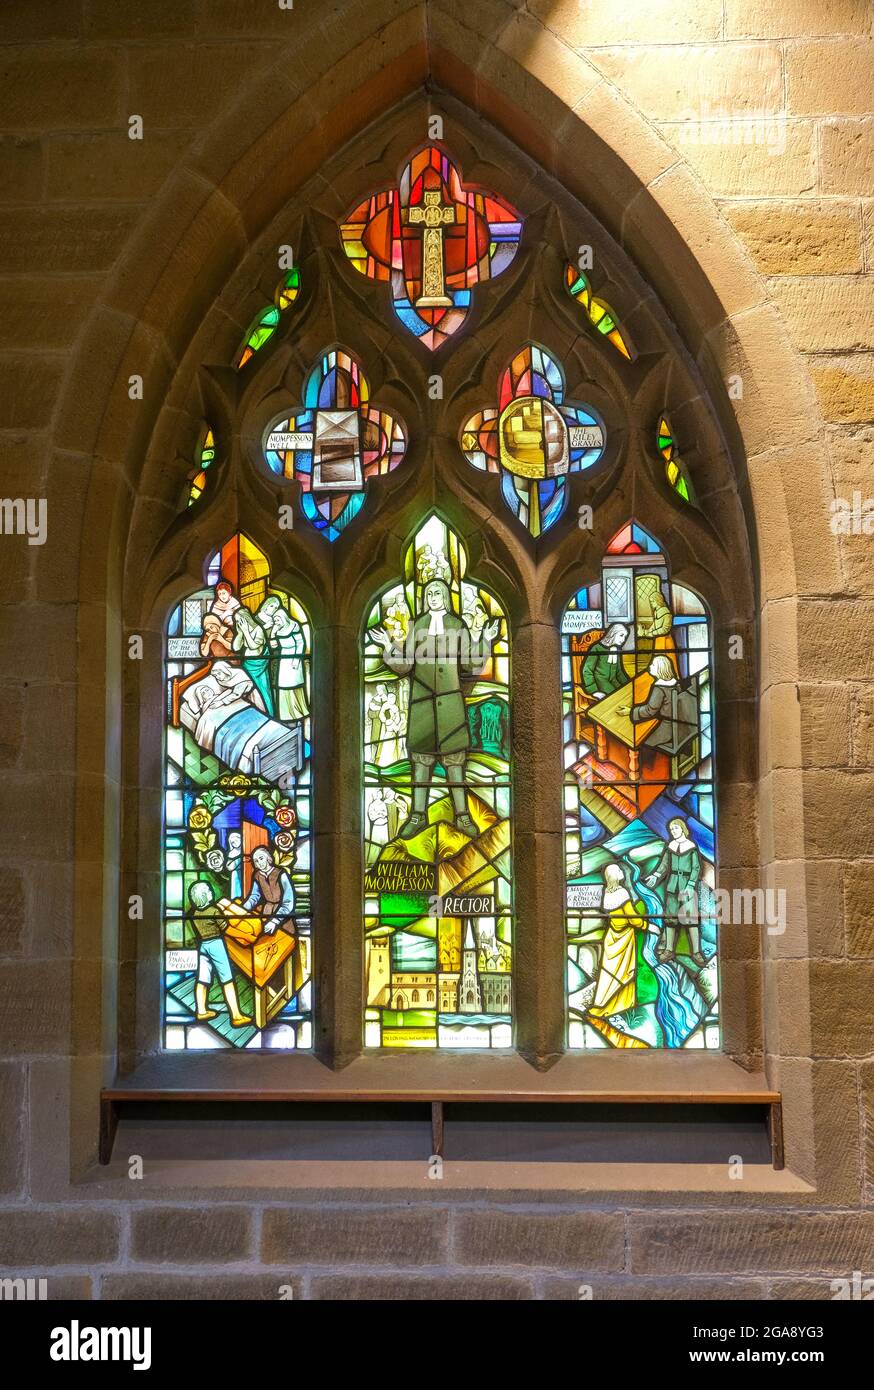 The modern stained glass window commemorating the sacrifices made by the inhabitants in the Derbyshire plague village of Eyam. Stock Photo